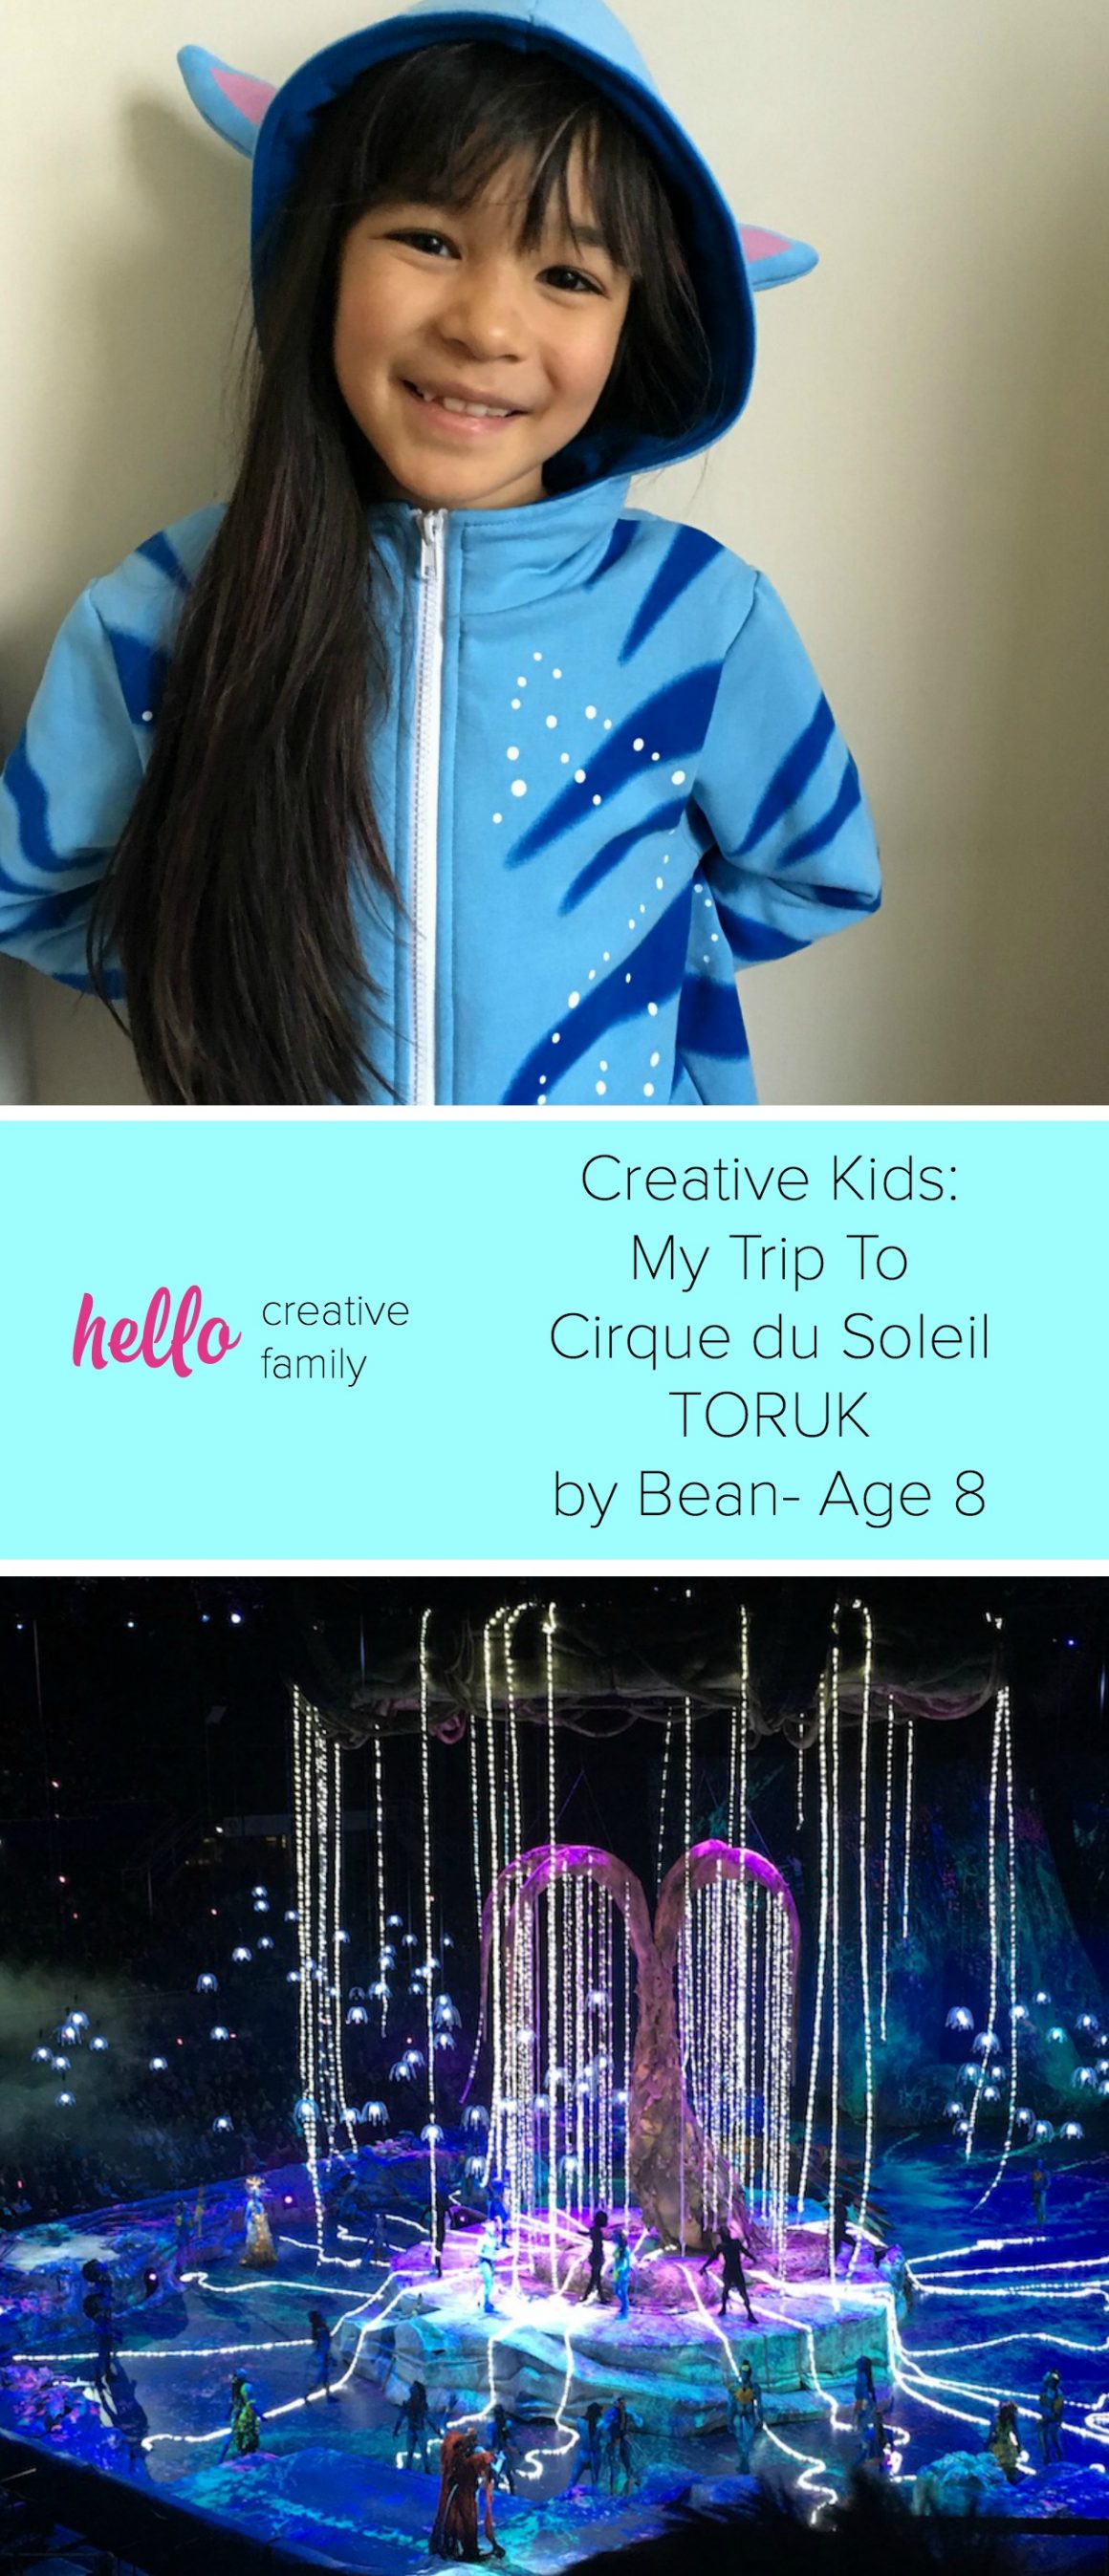 An 8 year old writes a recap on a seeing Cirque du Soleil TORUK from a kids point of view. Spoiler alert: She loved it and can't wait for her next show!